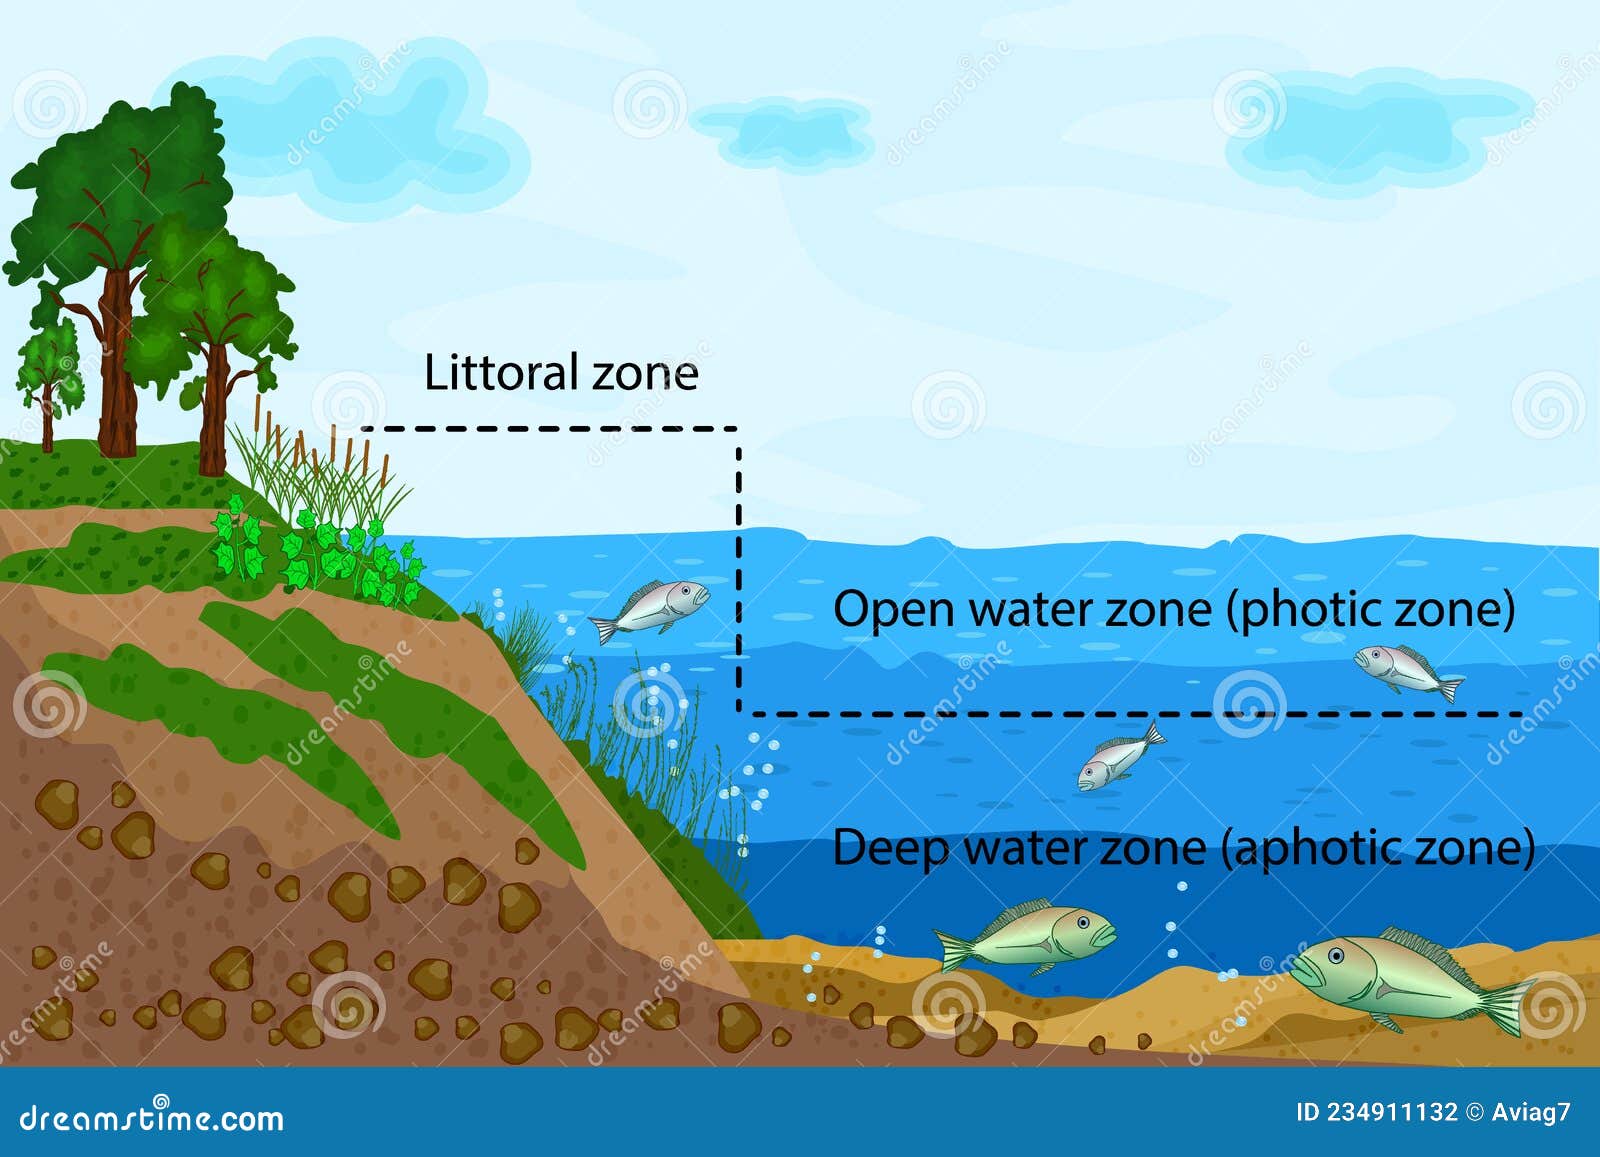 pond or river freshwater zones diagram with text for education. lake ecosystems division into littoral, open water and deep water